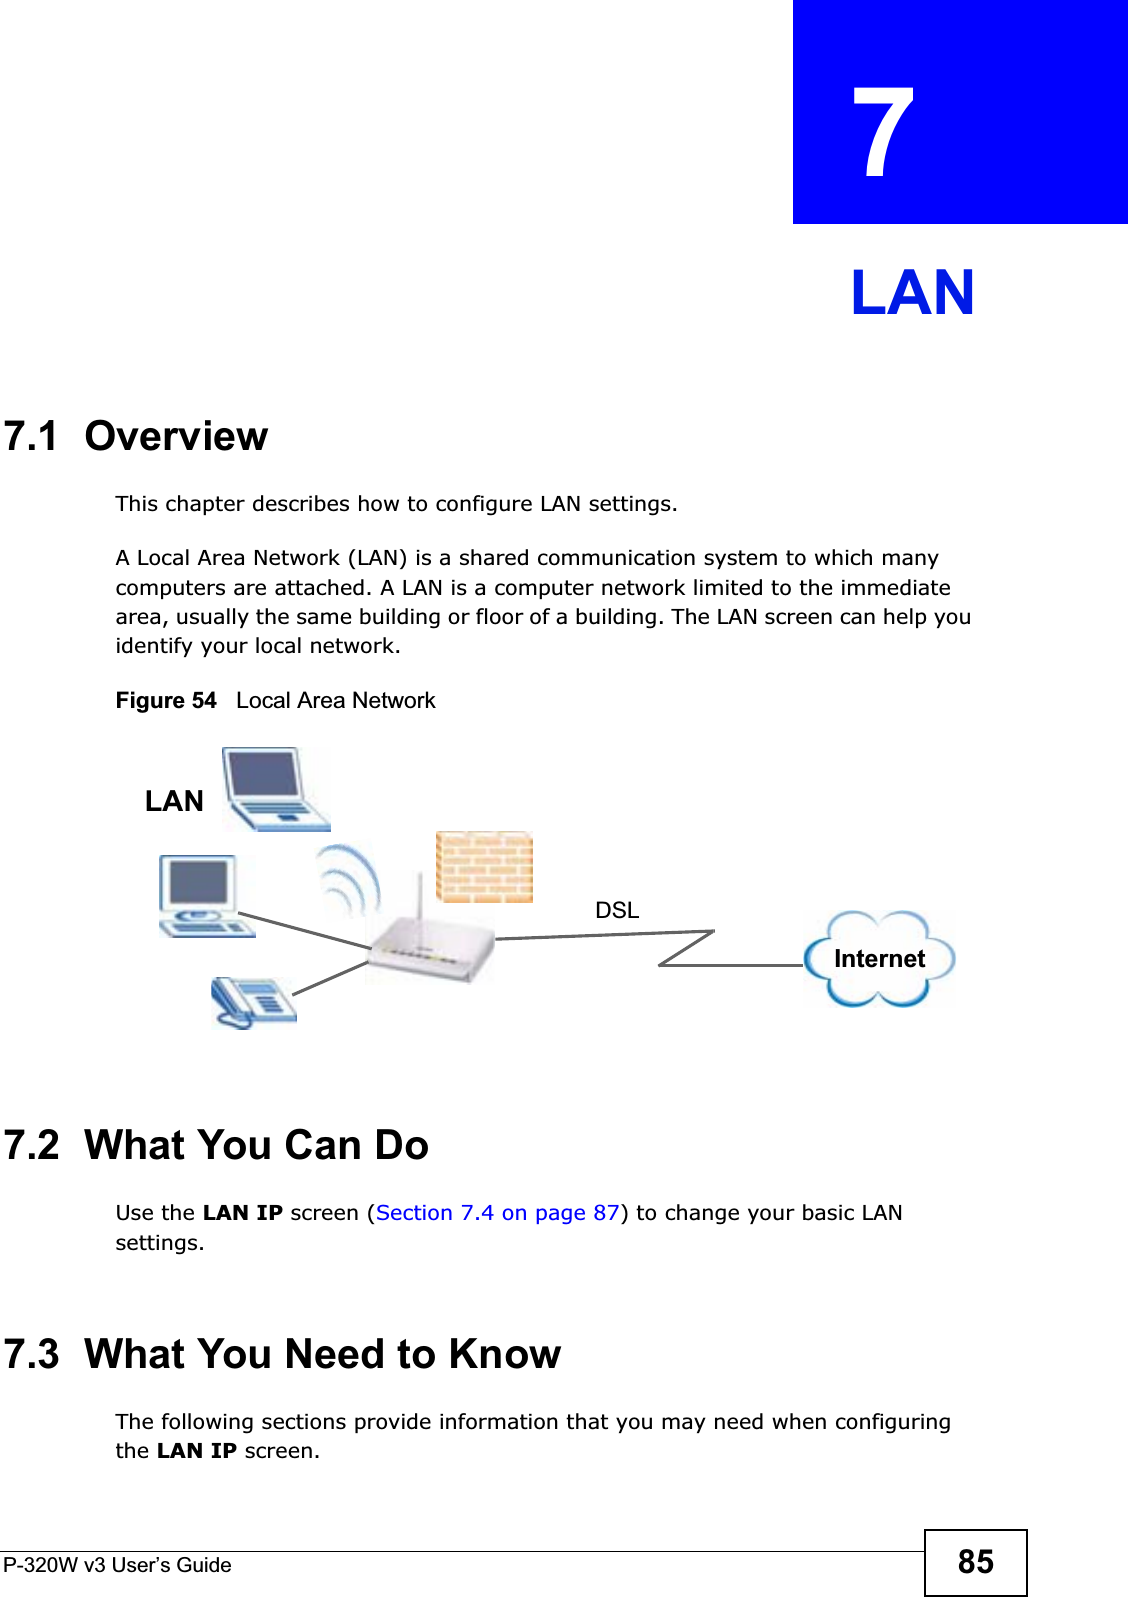 P-320W v3 User’s Guide 85CHAPTER  7 LAN7.1  OverviewThis chapter describes how to configure LAN settings.A Local Area Network (LAN) is a shared communication system to which many computers are attached. A LAN is a computer network limited to the immediate area, usually the same building or floor of a building. The LAN screen can help you identify your local network.Figure 54   Local Area Network7.2  What You Can DoUse the LAN IP screen (Section 7.4 on page 87) to change your basic LAN settings.7.3  What You Need to KnowThe following sections provide information that you may need when configuring the LAN IP screen.DSLLANInternet